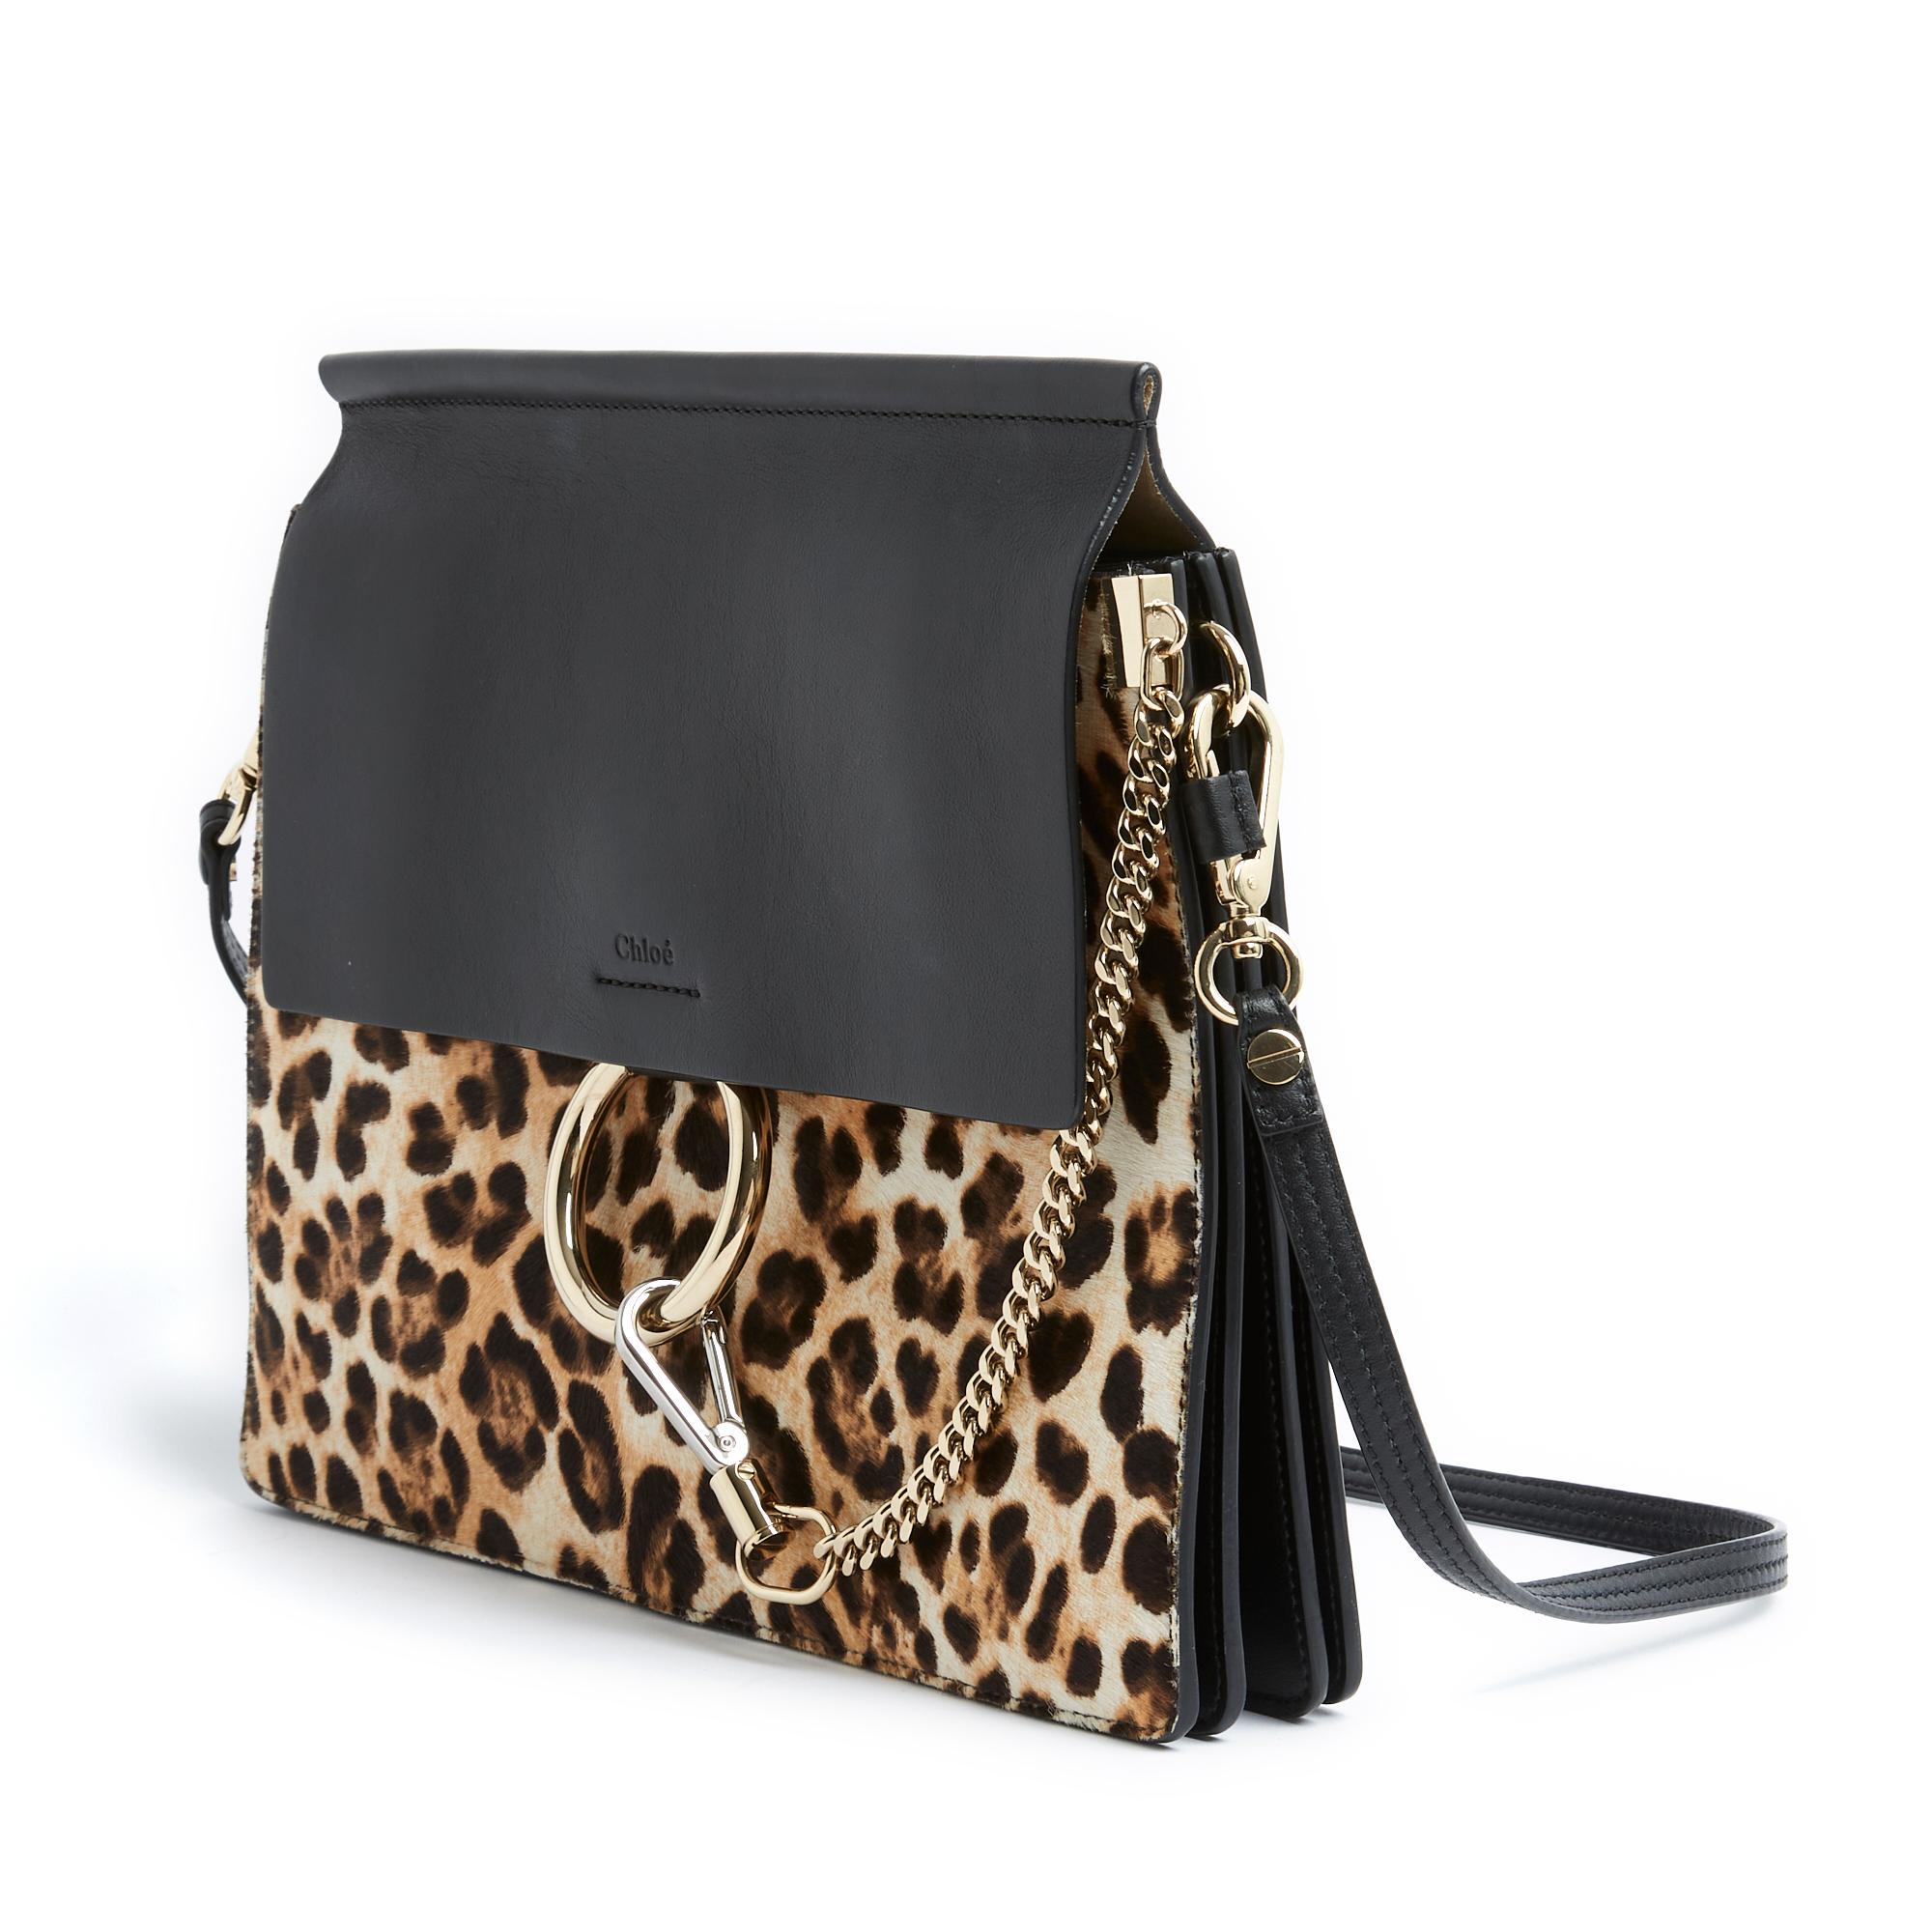 Chloé Faye Classic model bag in black leather and leopard-print pony-style calfskin, interior (and reverse of the flap) in beige suede with 2 large compartments, 1 of which has a zipped pocket, metalwork between gold and silver, removable and